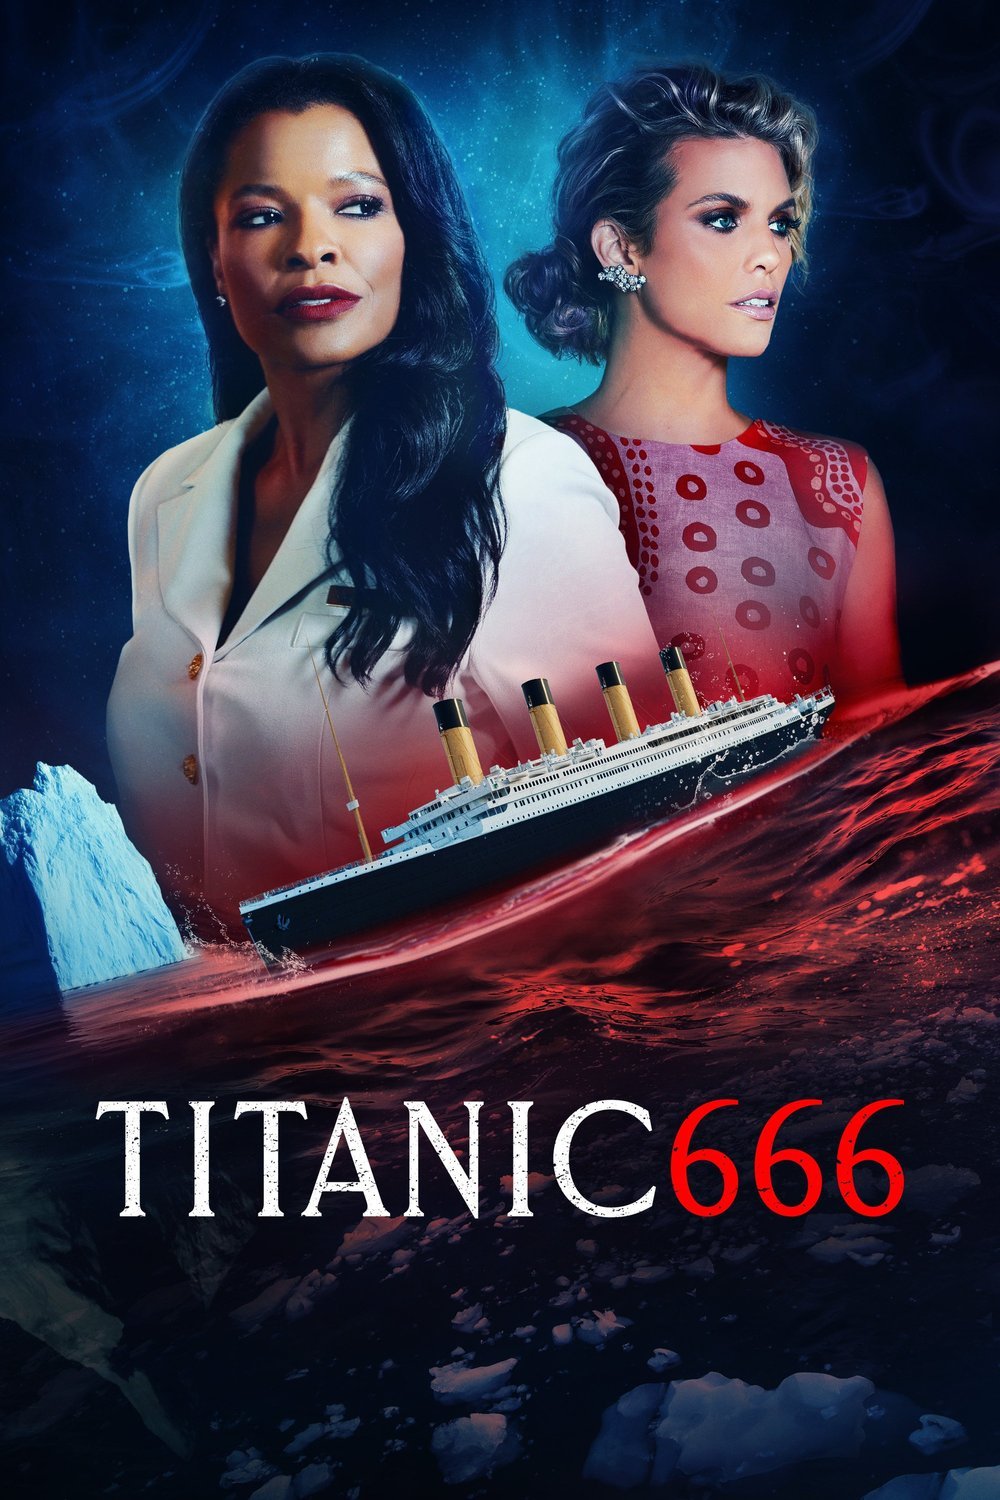 Poster of the movie Titanic 666